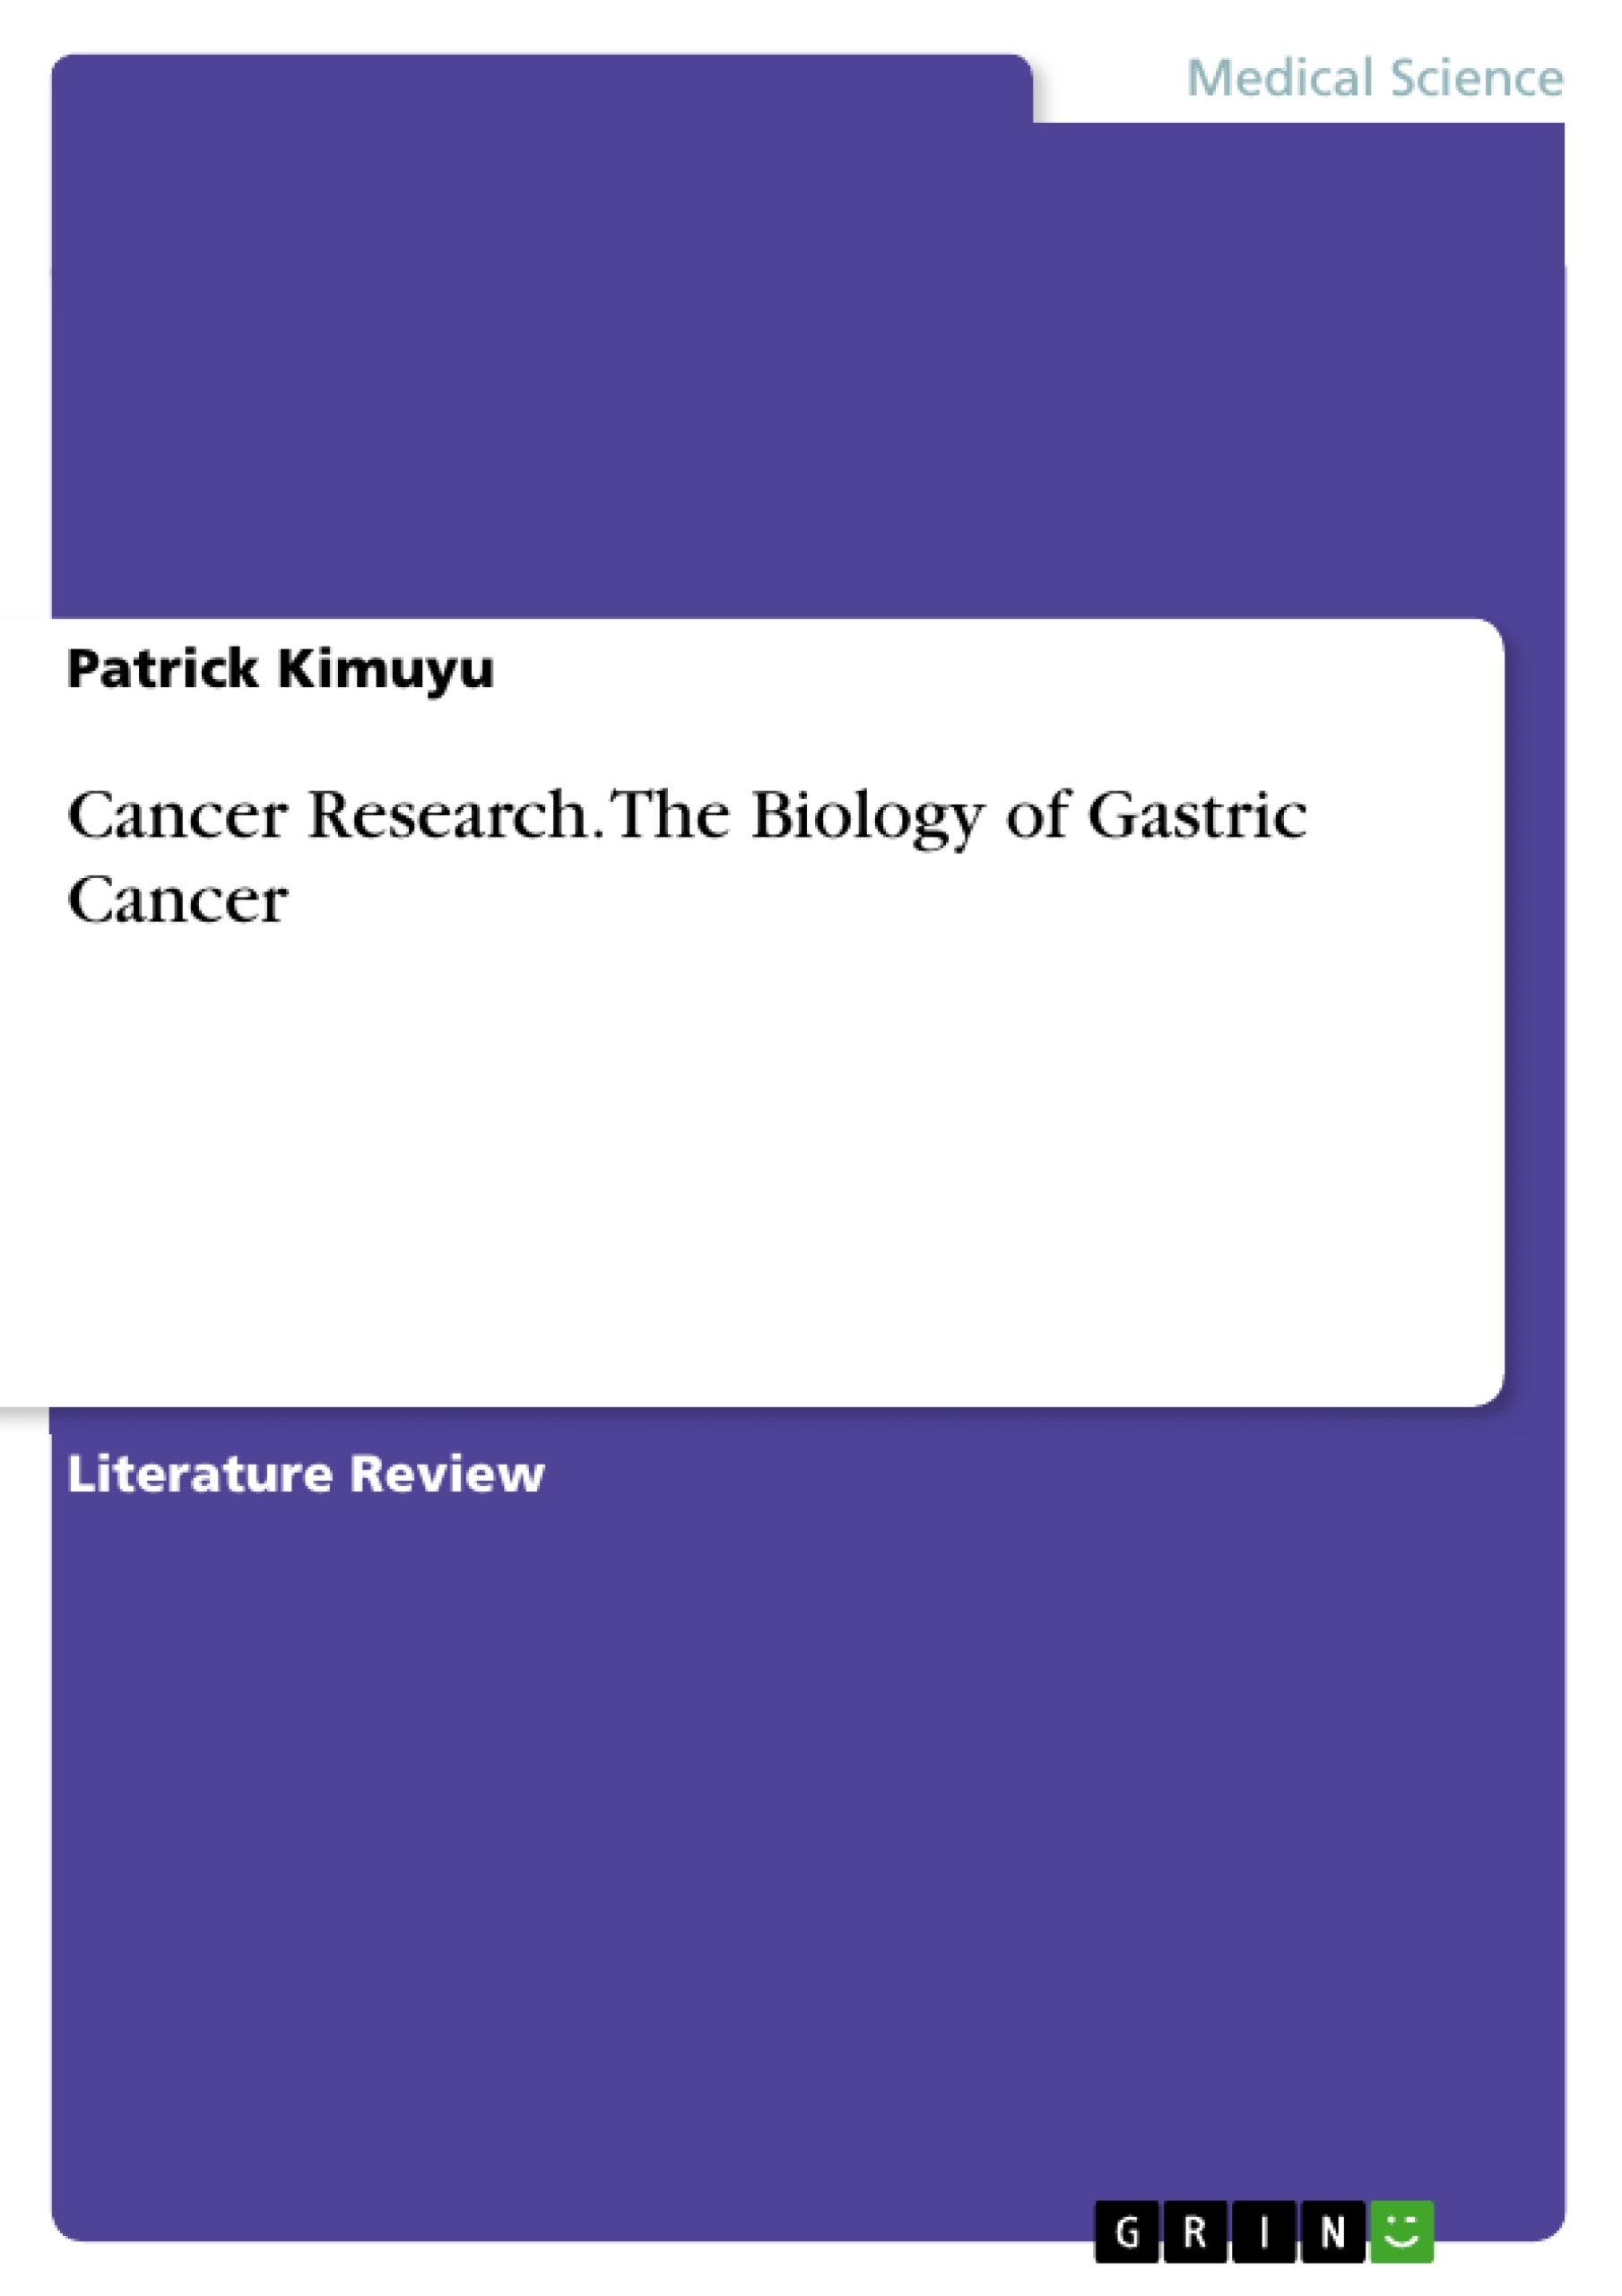 Título: Cancer Research. The Biology of Gastric Cancer